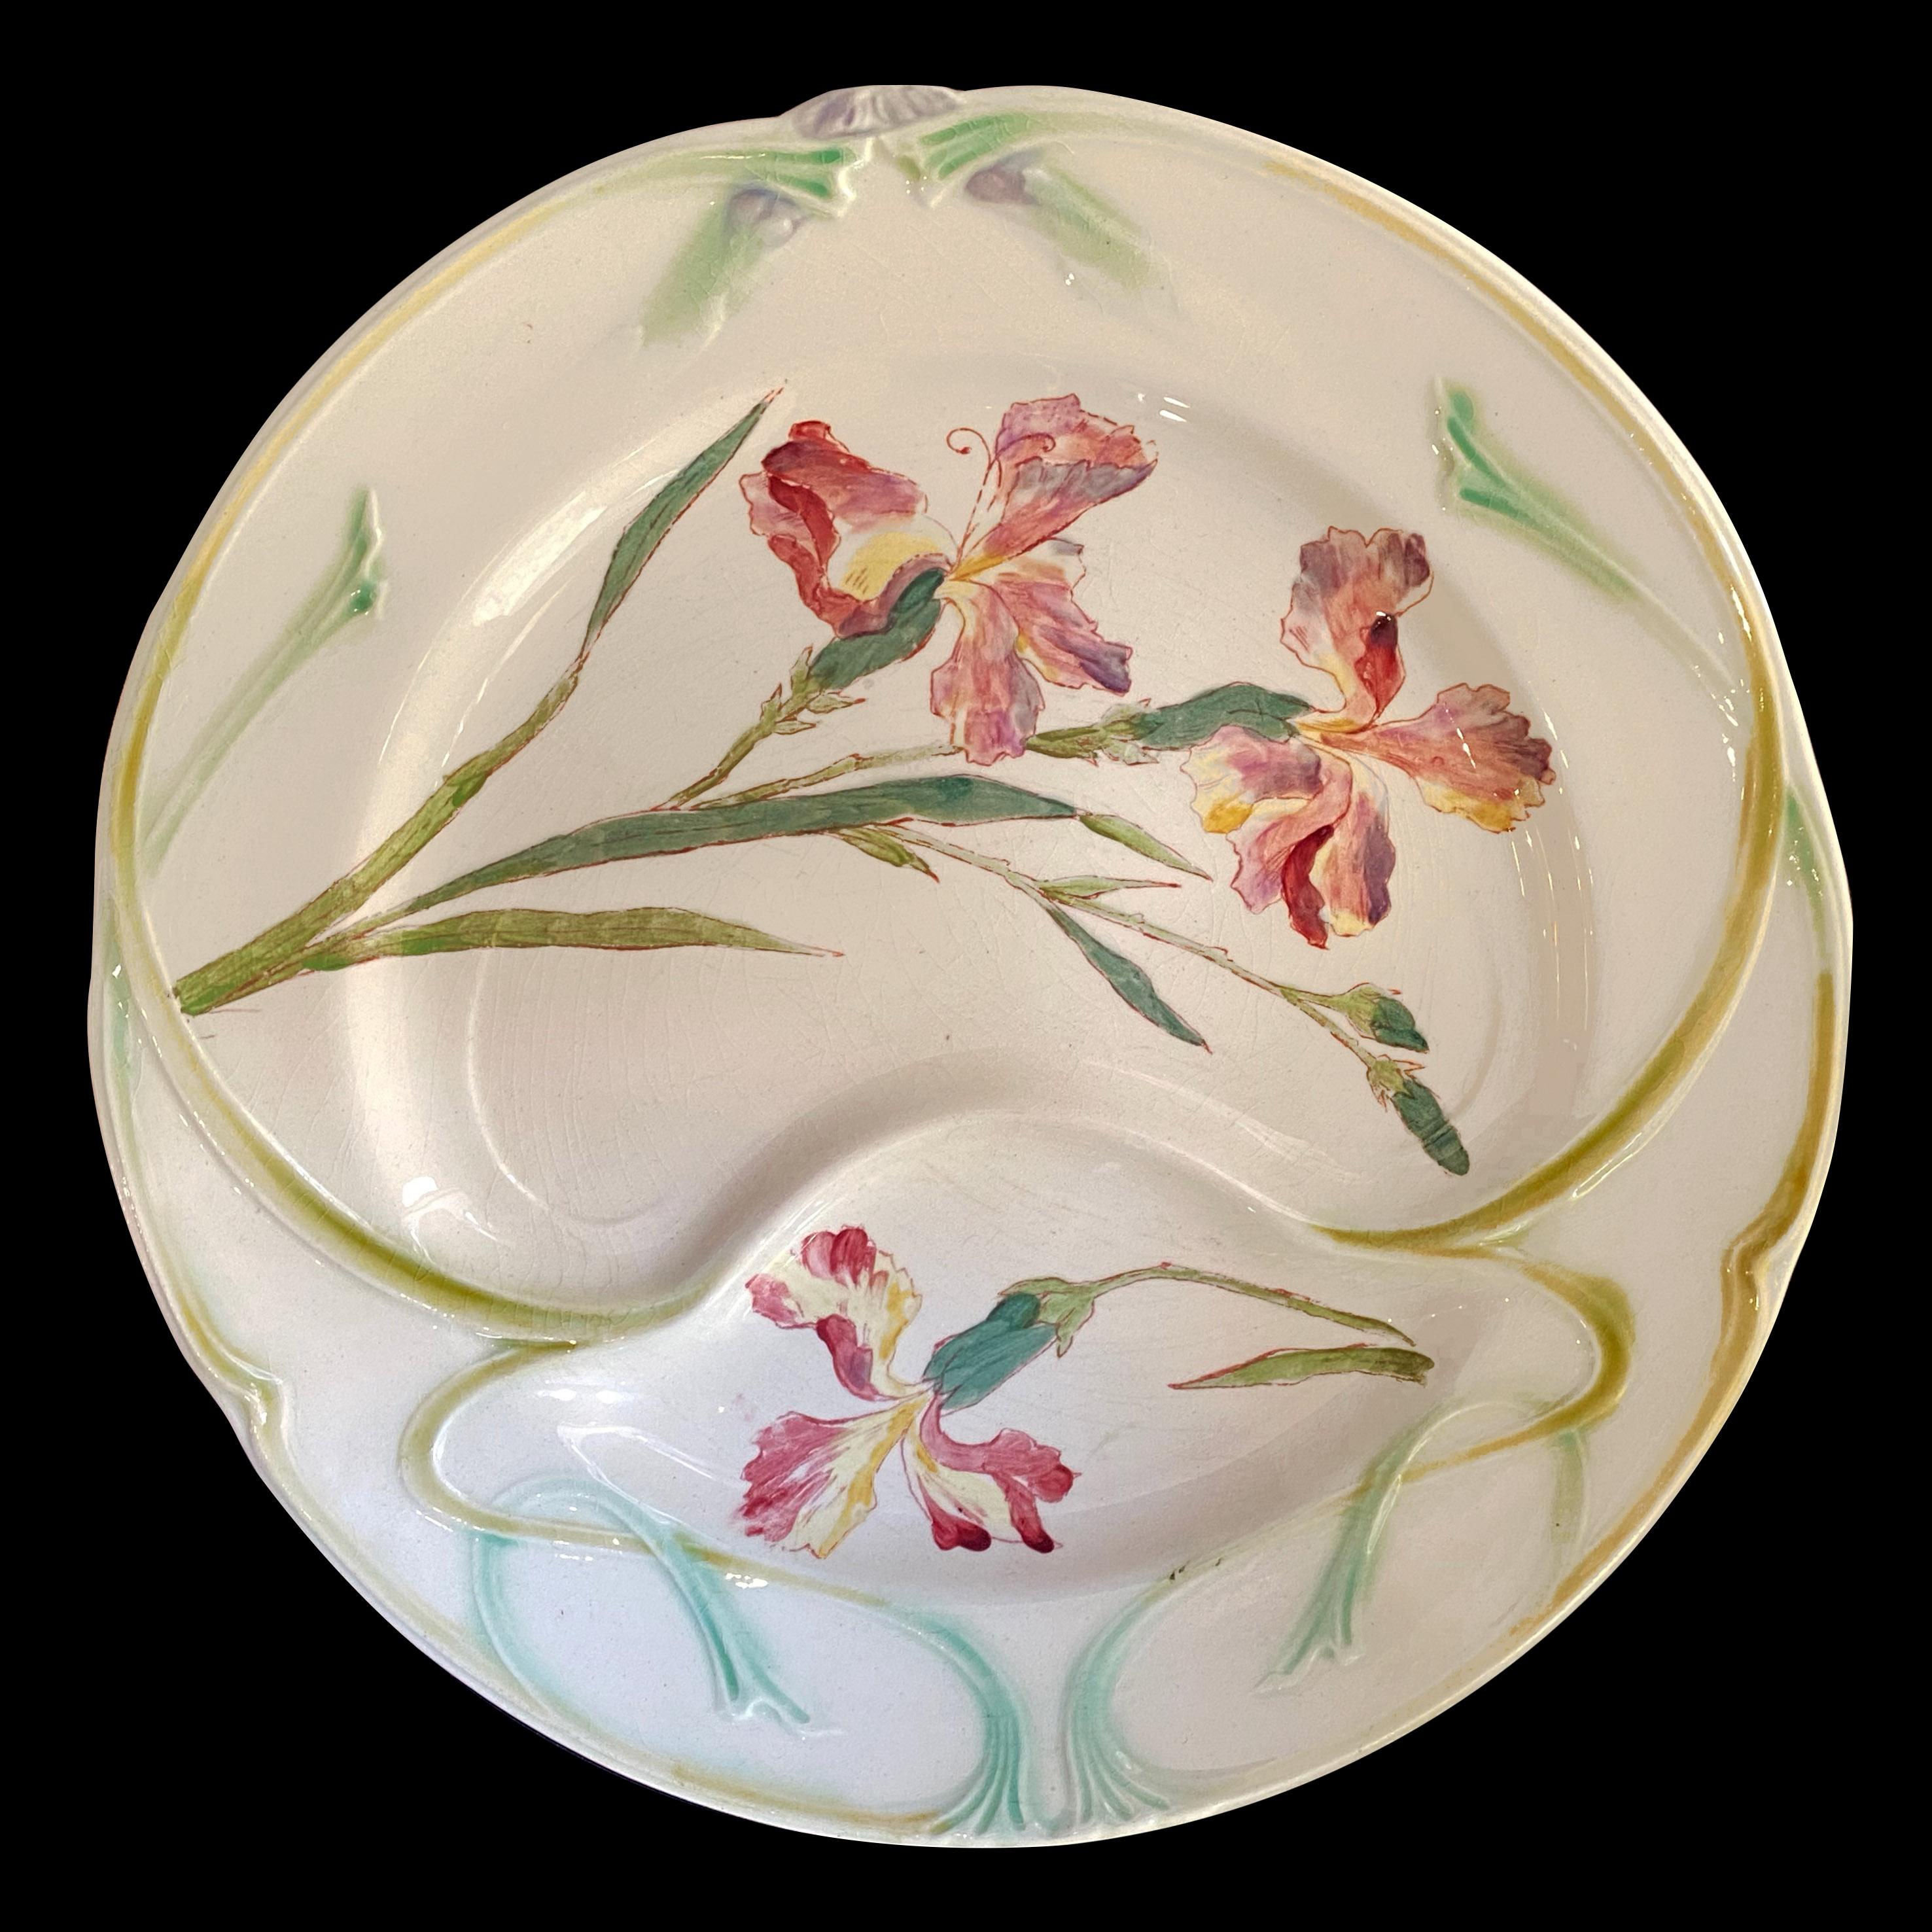 Unusual and colorful plates for Asparagus Iris are hand painted Iris. This 19th Barbotine is a remarkable French Art Nouveau Longchamp famous earthenware.